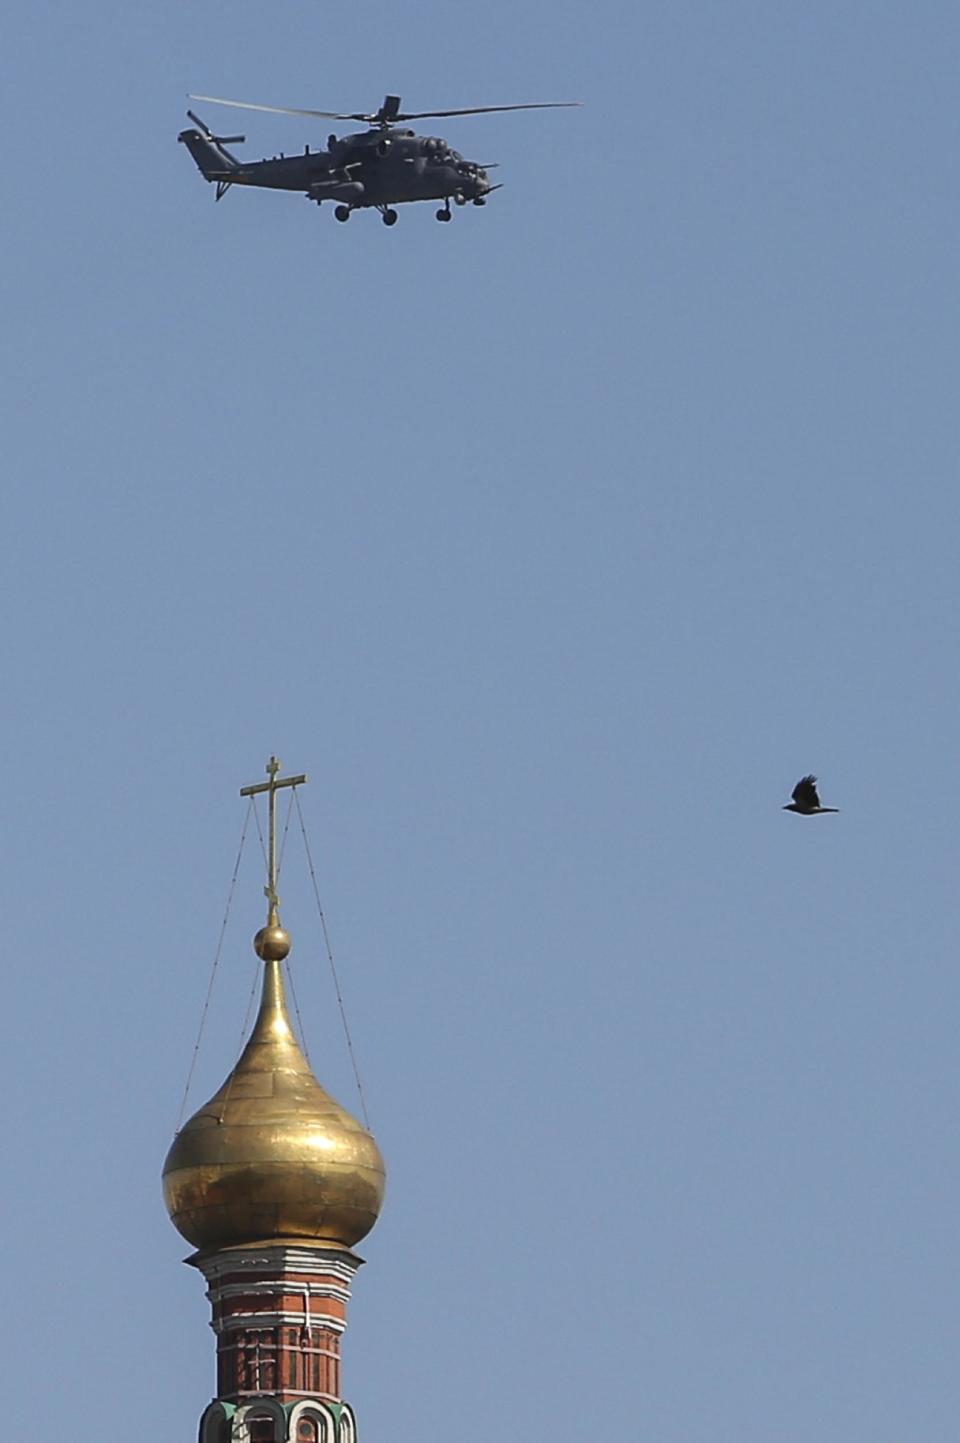 A Russian military helicopter Mi-35 flies over St. Basil Cathedral during the Victory Day parade parade in Red Square in Moscow, Russia, Friday, May 9, 2014. Russia marked the Victory Day on May 9 holding a military parade at Red Square. (AP Photo/Denis Tyrin)